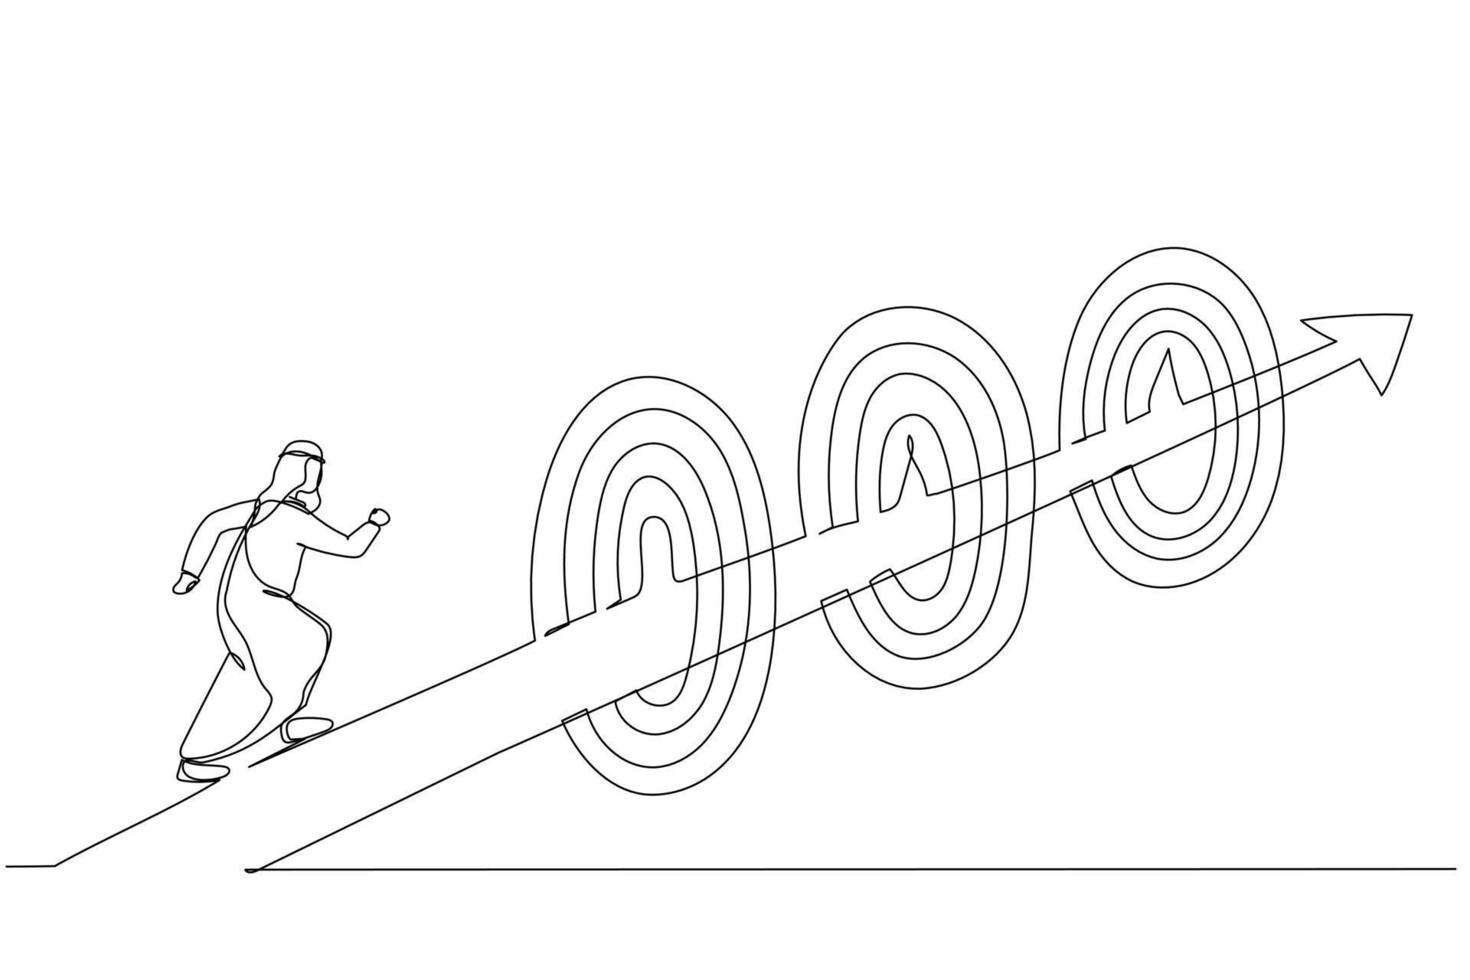 Drawing of arab businessman running on arrow way through targets. Metaphor for achievements or challenge to achieve targets and business goals. Single continuous line art style vector